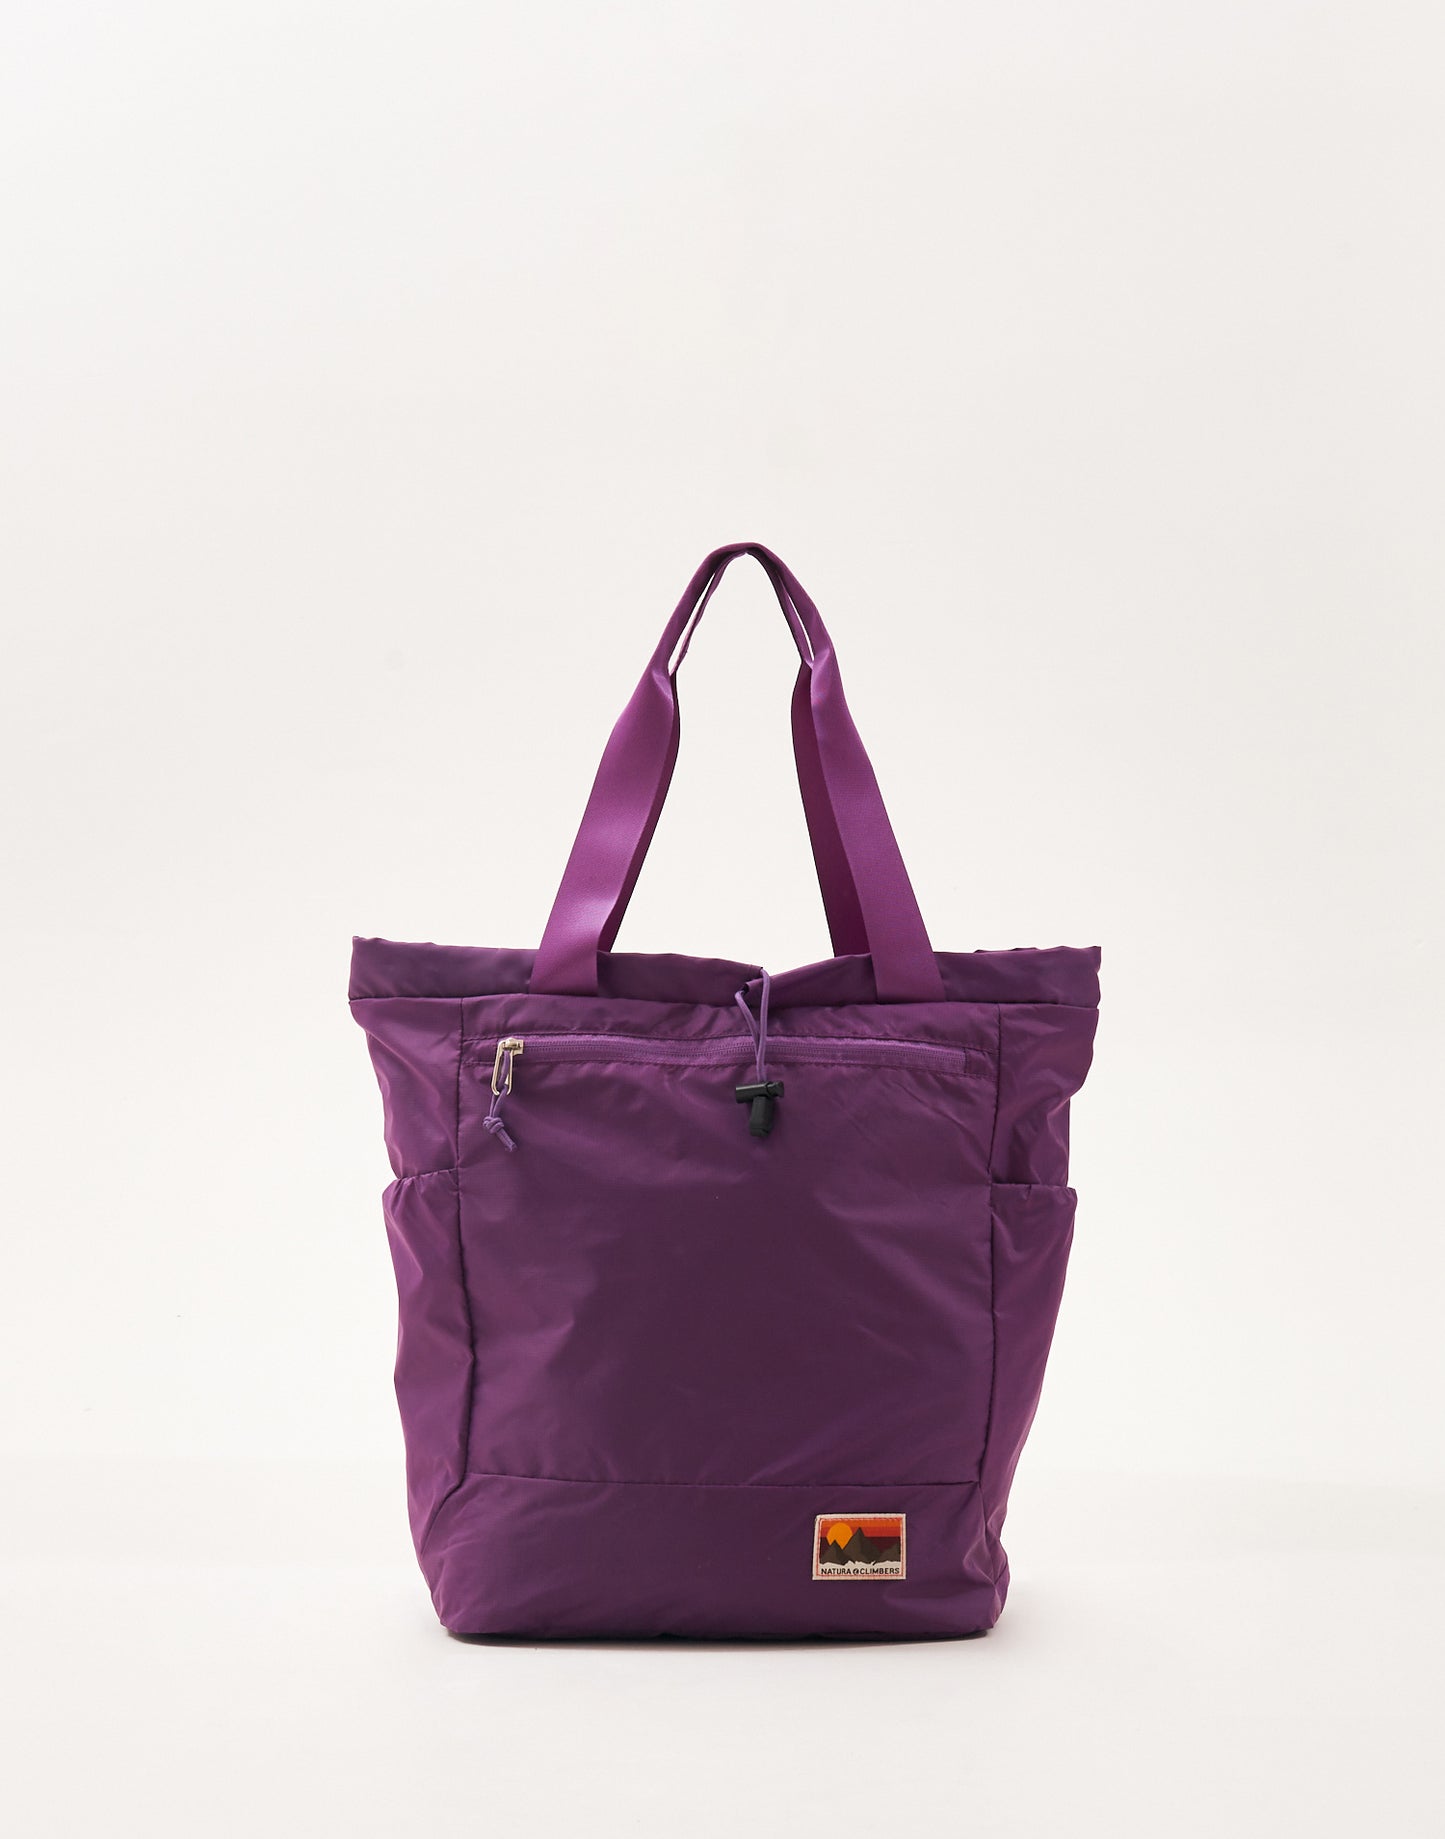 Tote bag with 2 handles